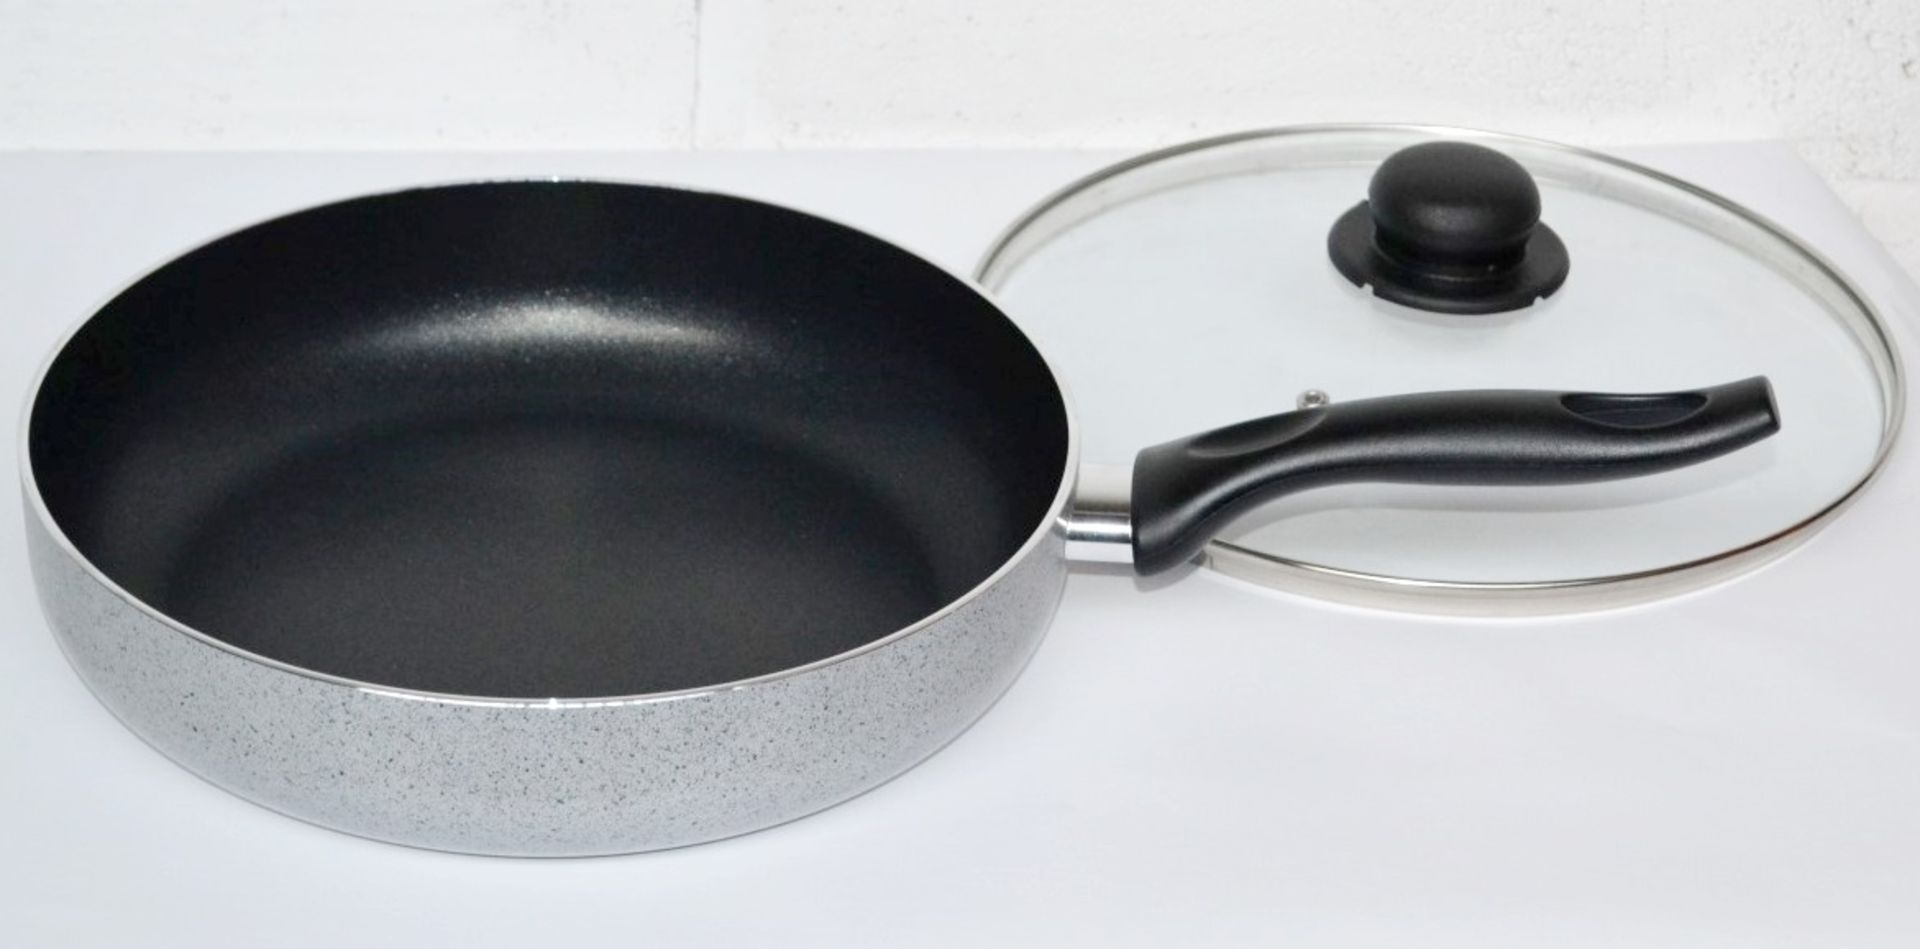 1 x 28cm Non-stick Frying Pans with Glass Lids - Colour: Stone Grey - Made In Italy - New & Sealed - Image 2 of 5